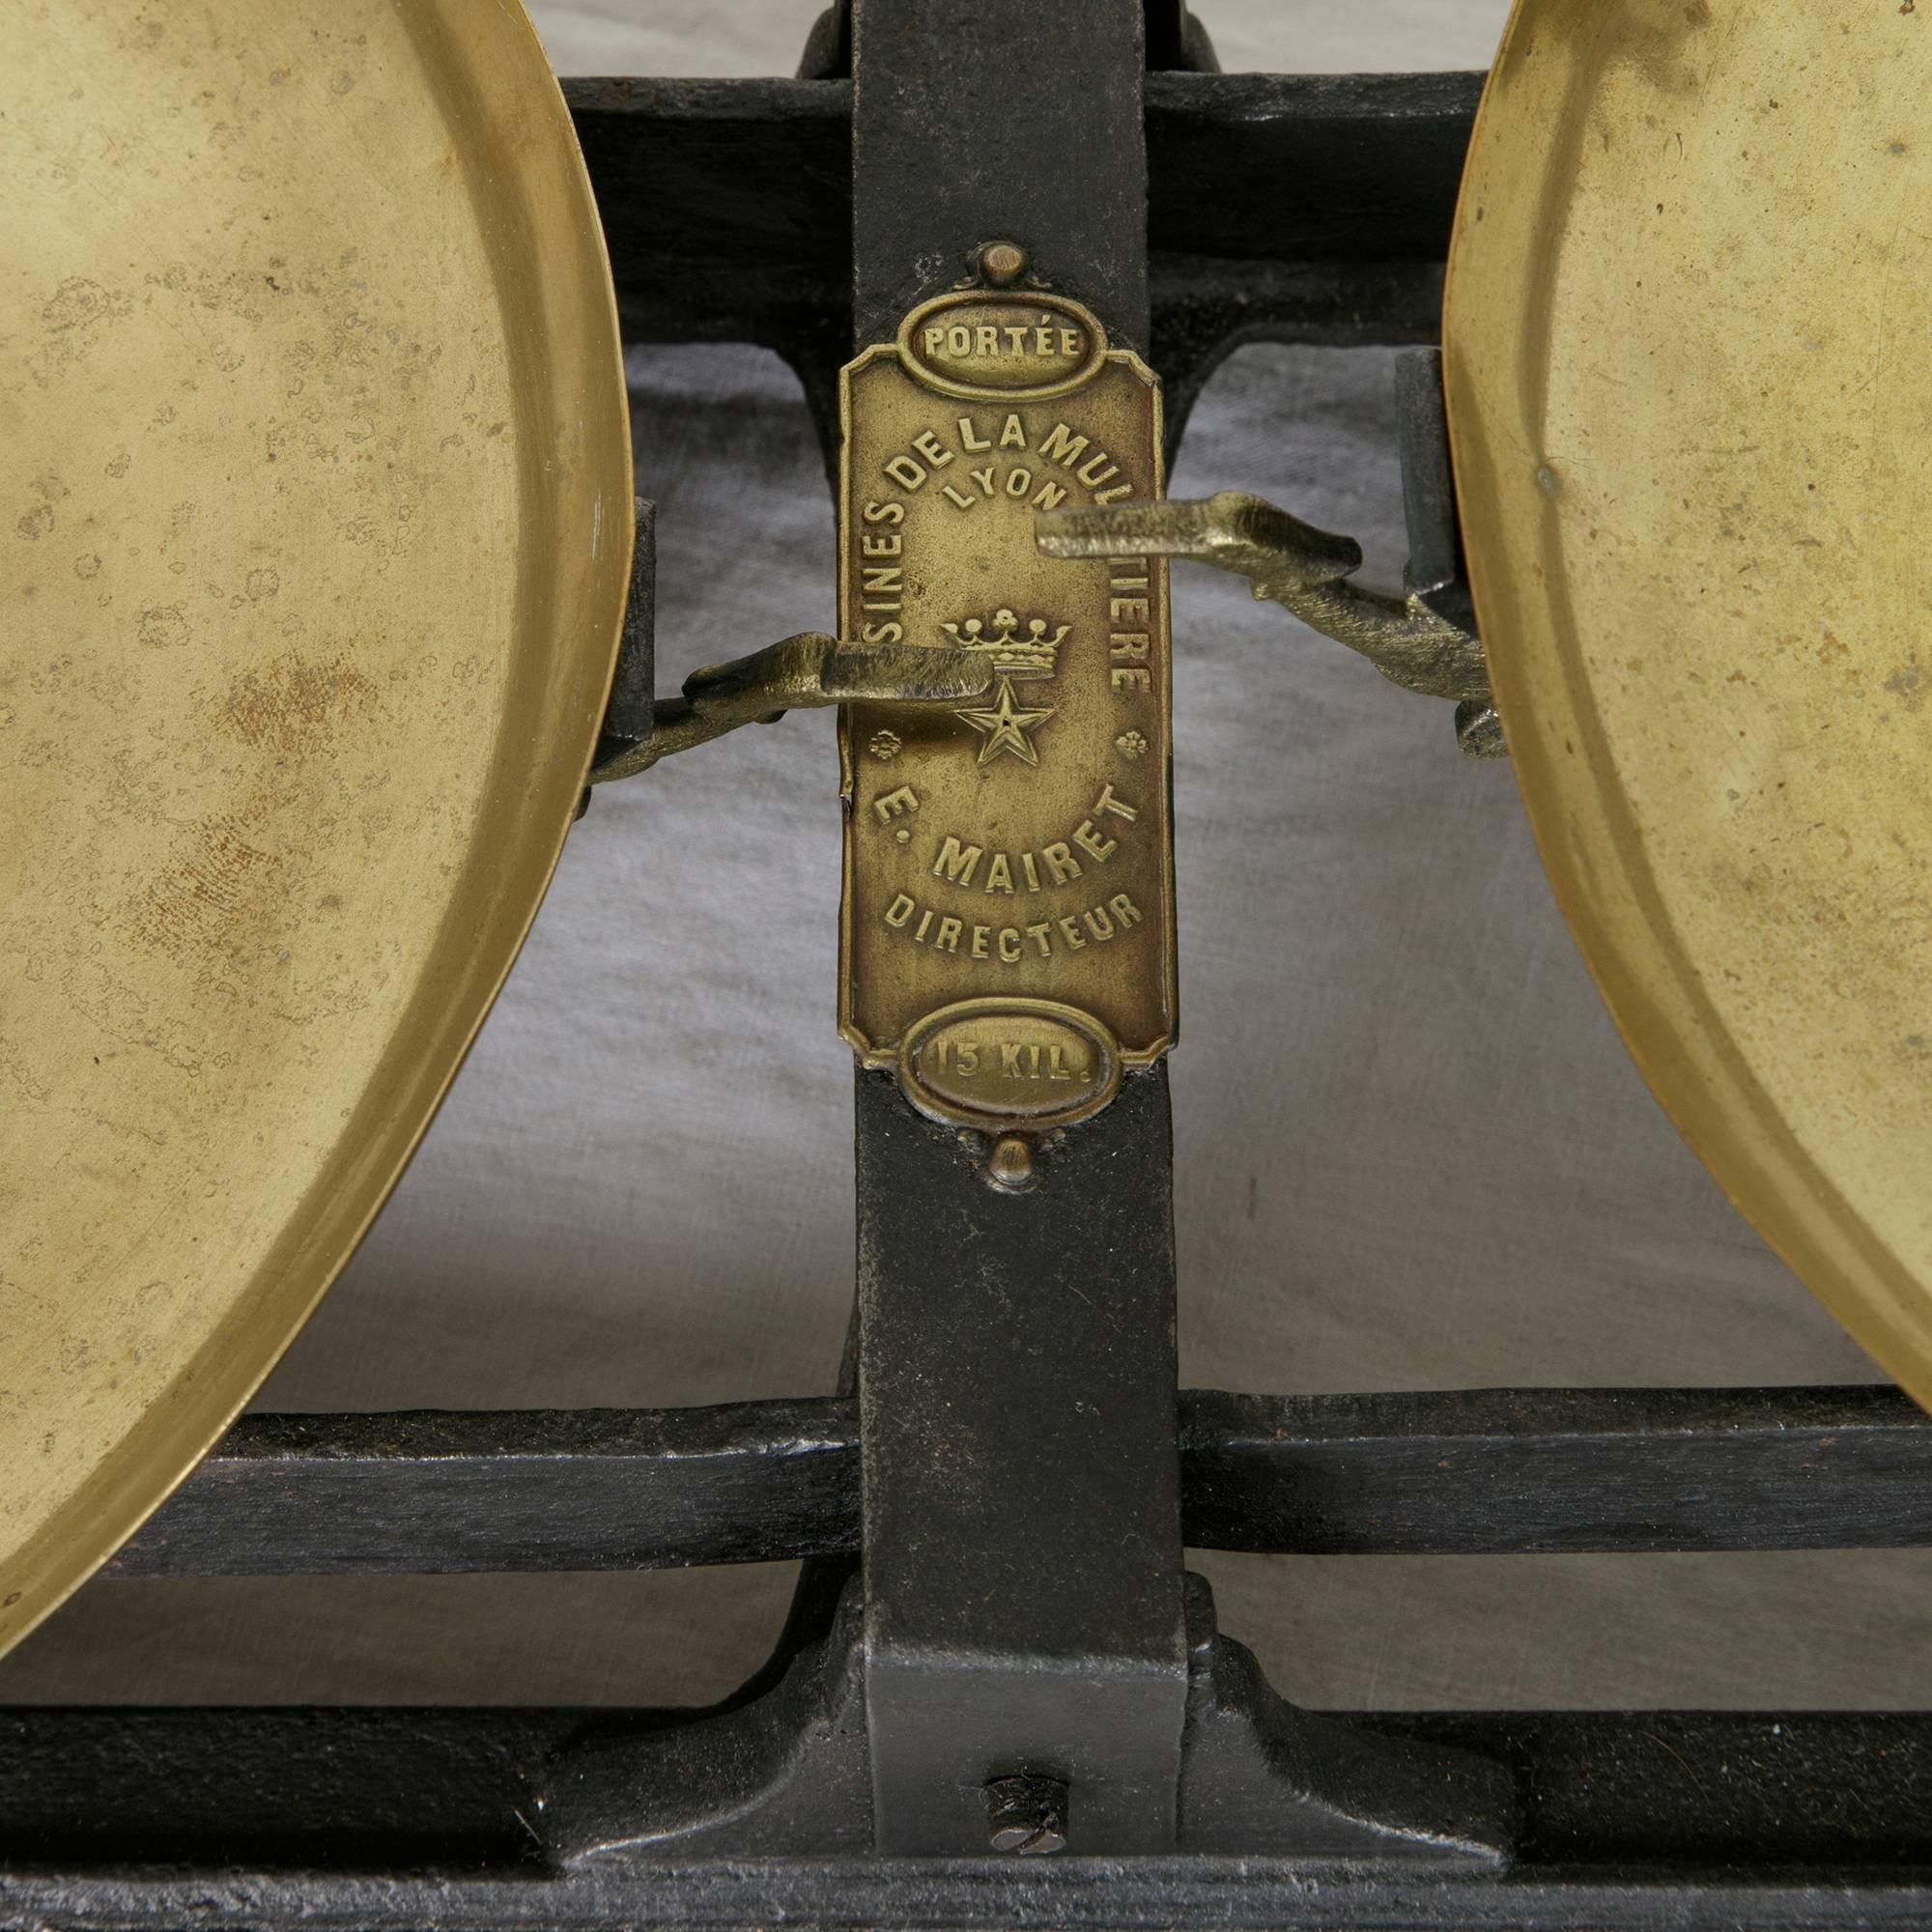 This set of late 19th century baker's scales features a leaf motif around its iron base and two ten-inch diameter brass pans. Its original brass label is marked Usines de la Mulatiere, Lyon E. Mairiet Directeur, Portee 15 kilos, indicating the